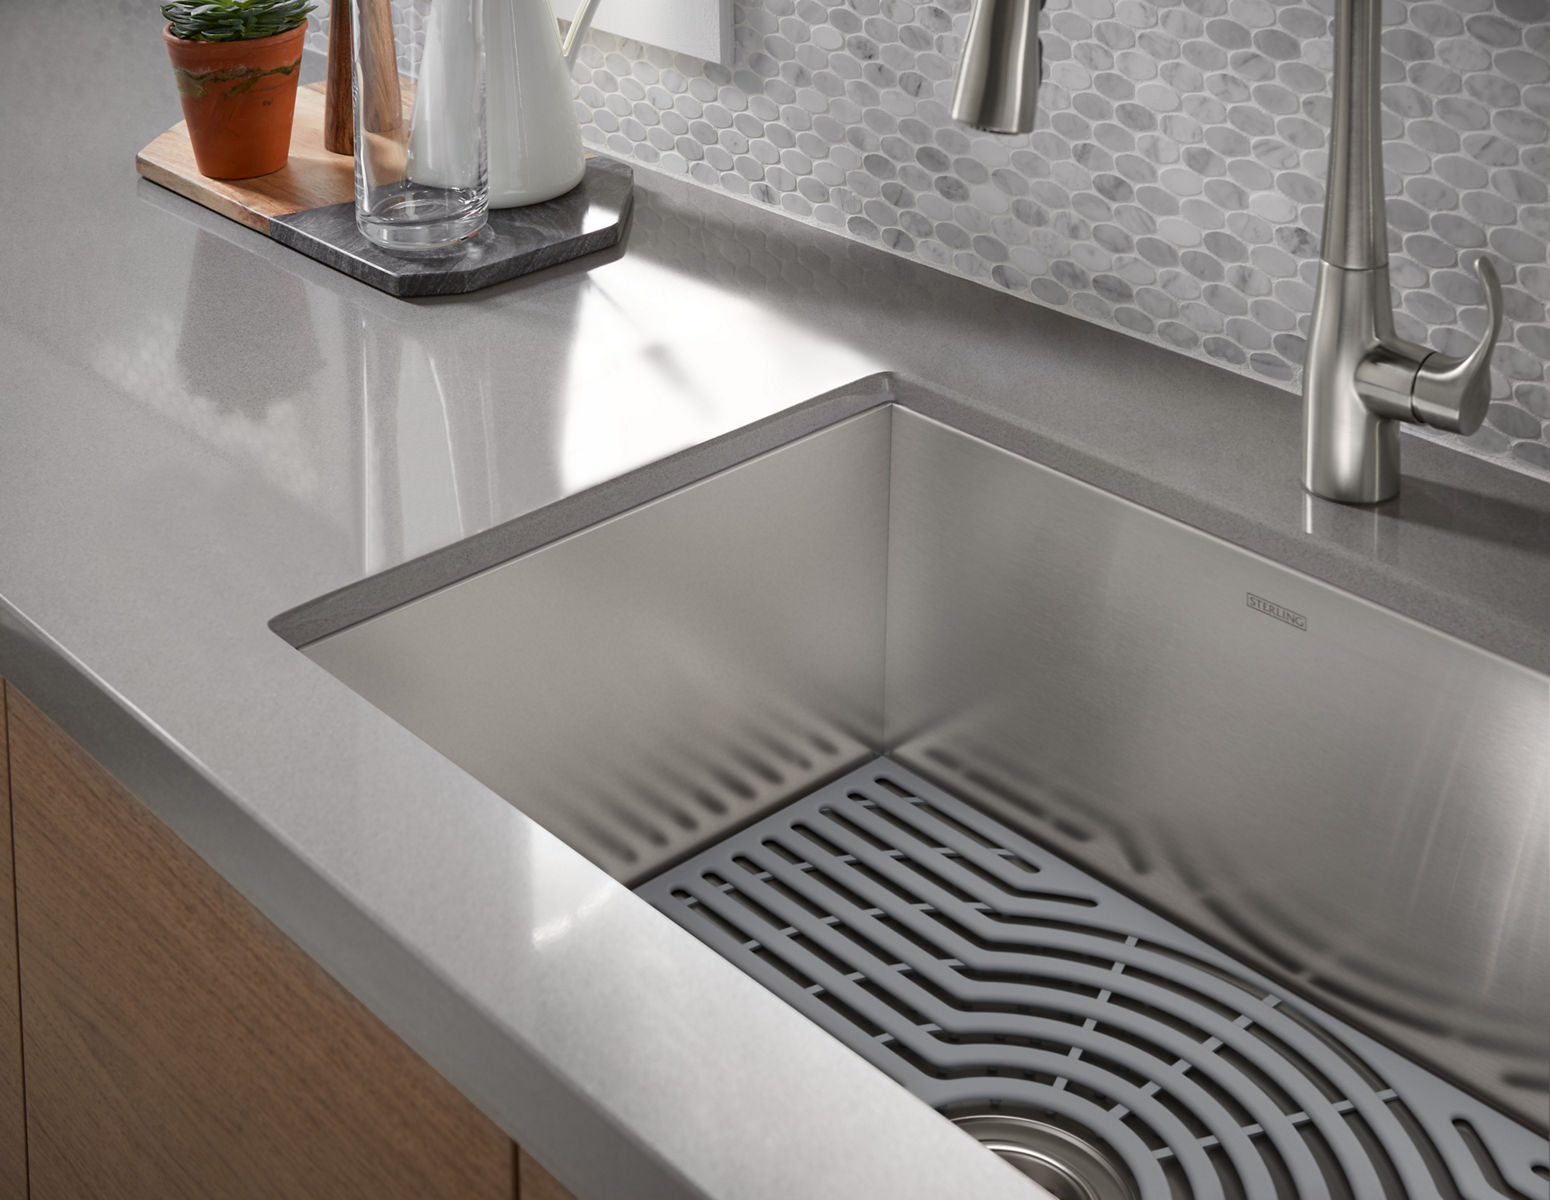 A stainless steel kitchen sink with a bottom tray, in a gray counter top and stainless steel faucet.